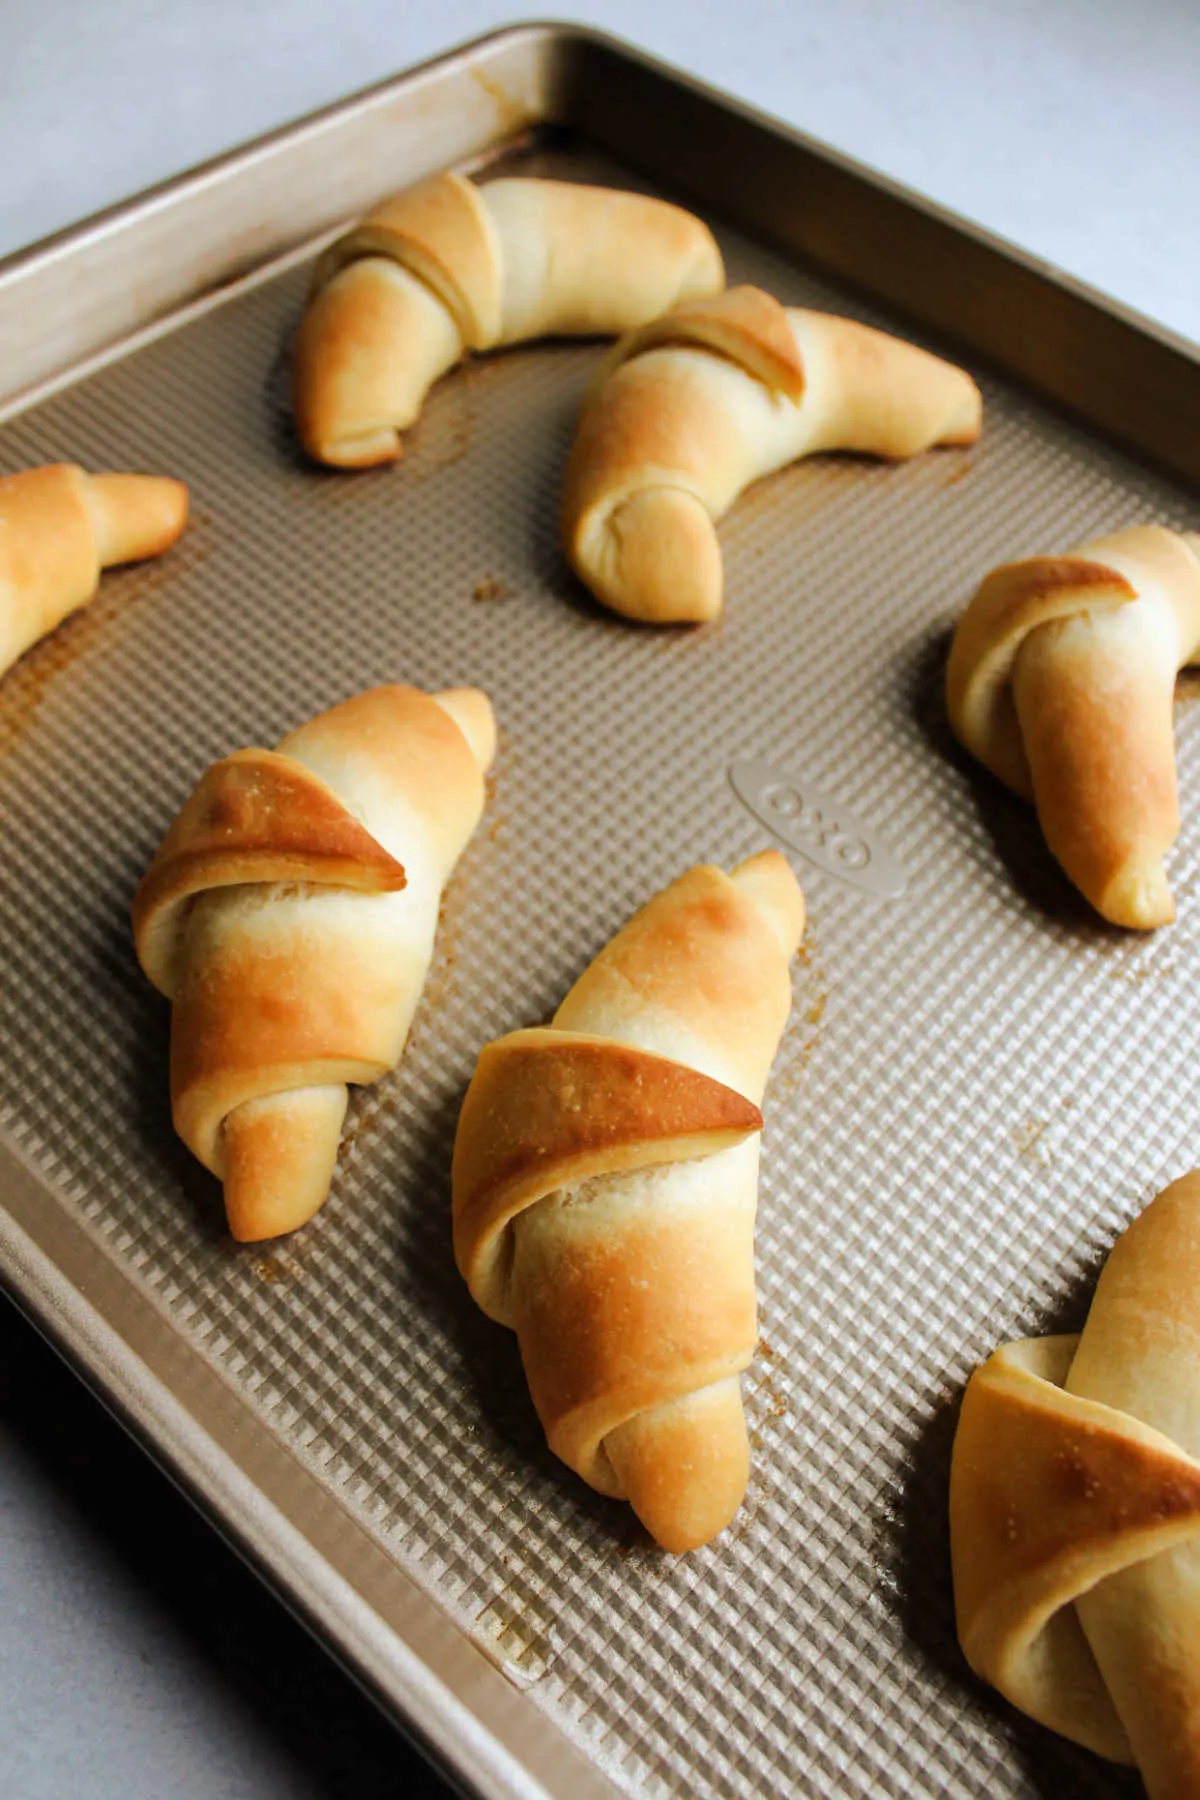 Homemade golden brown crescent rolls fresh from the oven.